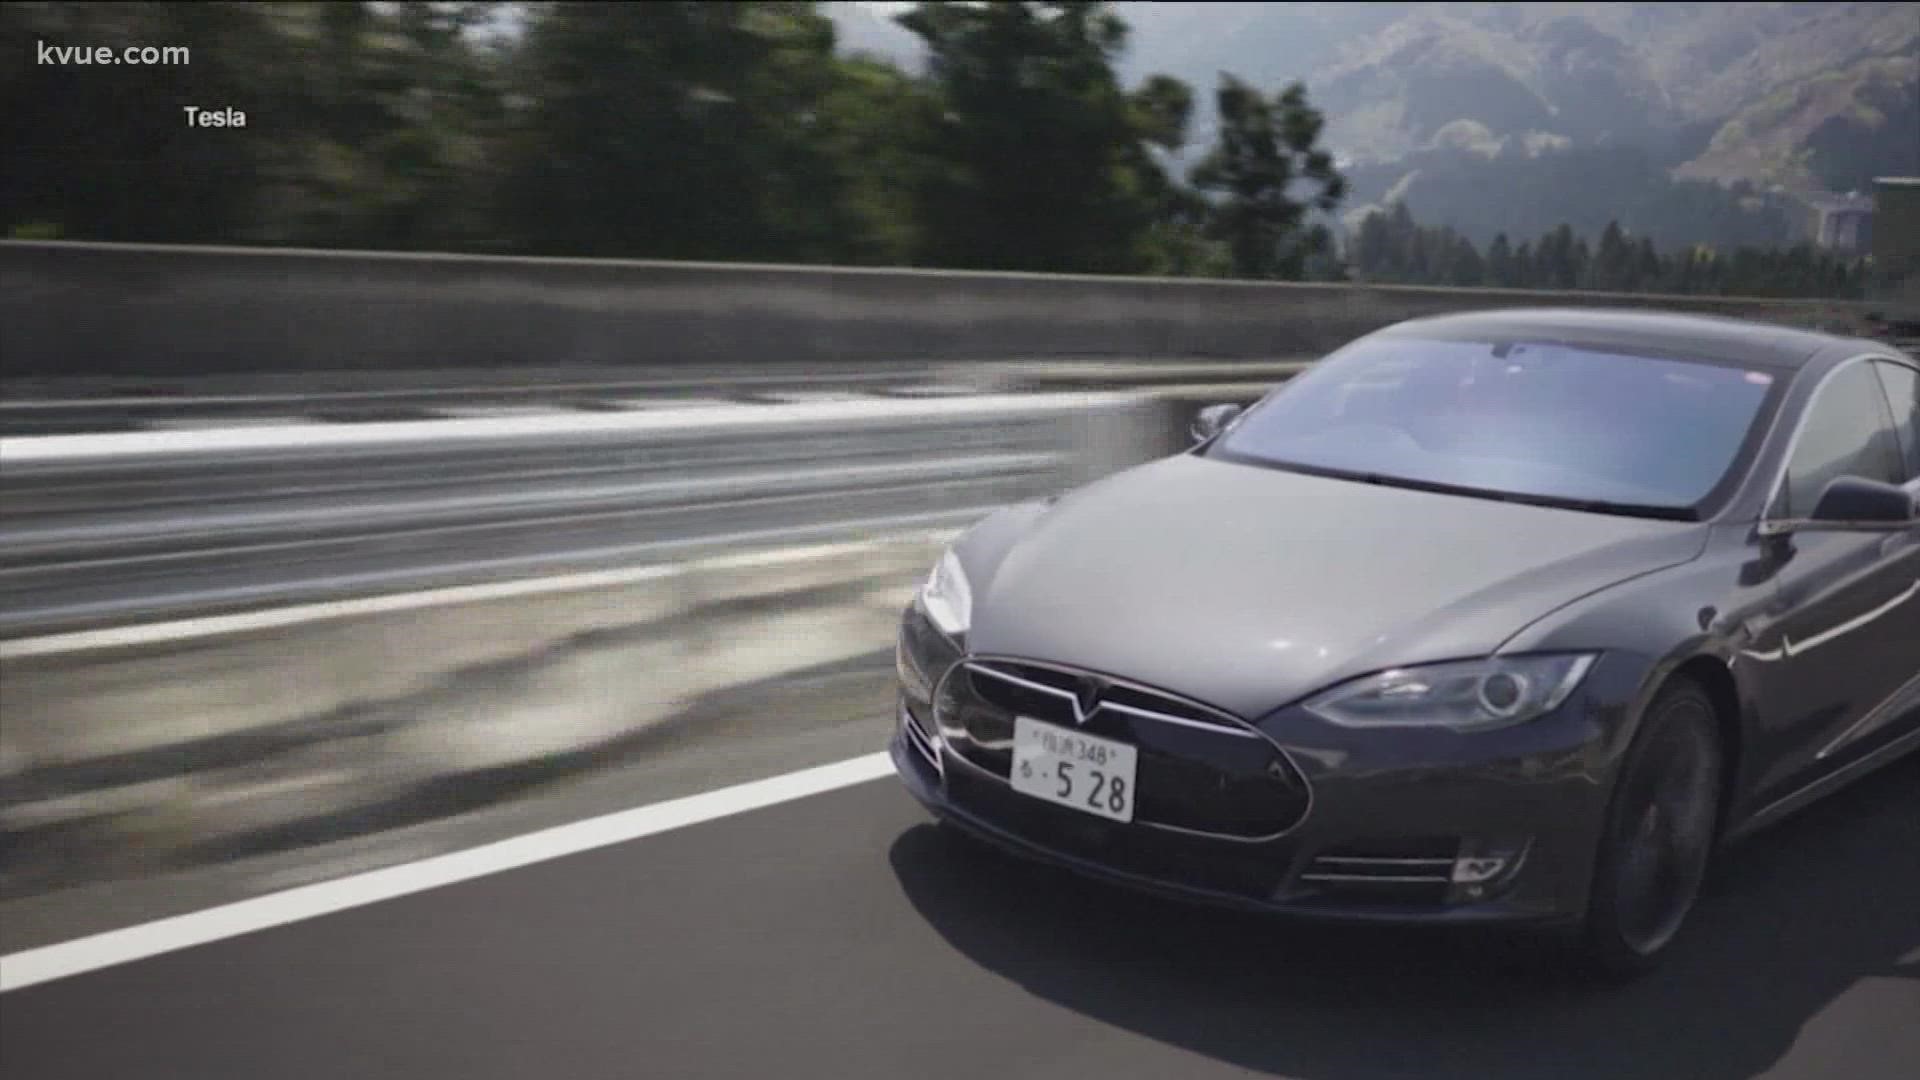 Certain model S, X, 3 and Y vehicles were recalled.